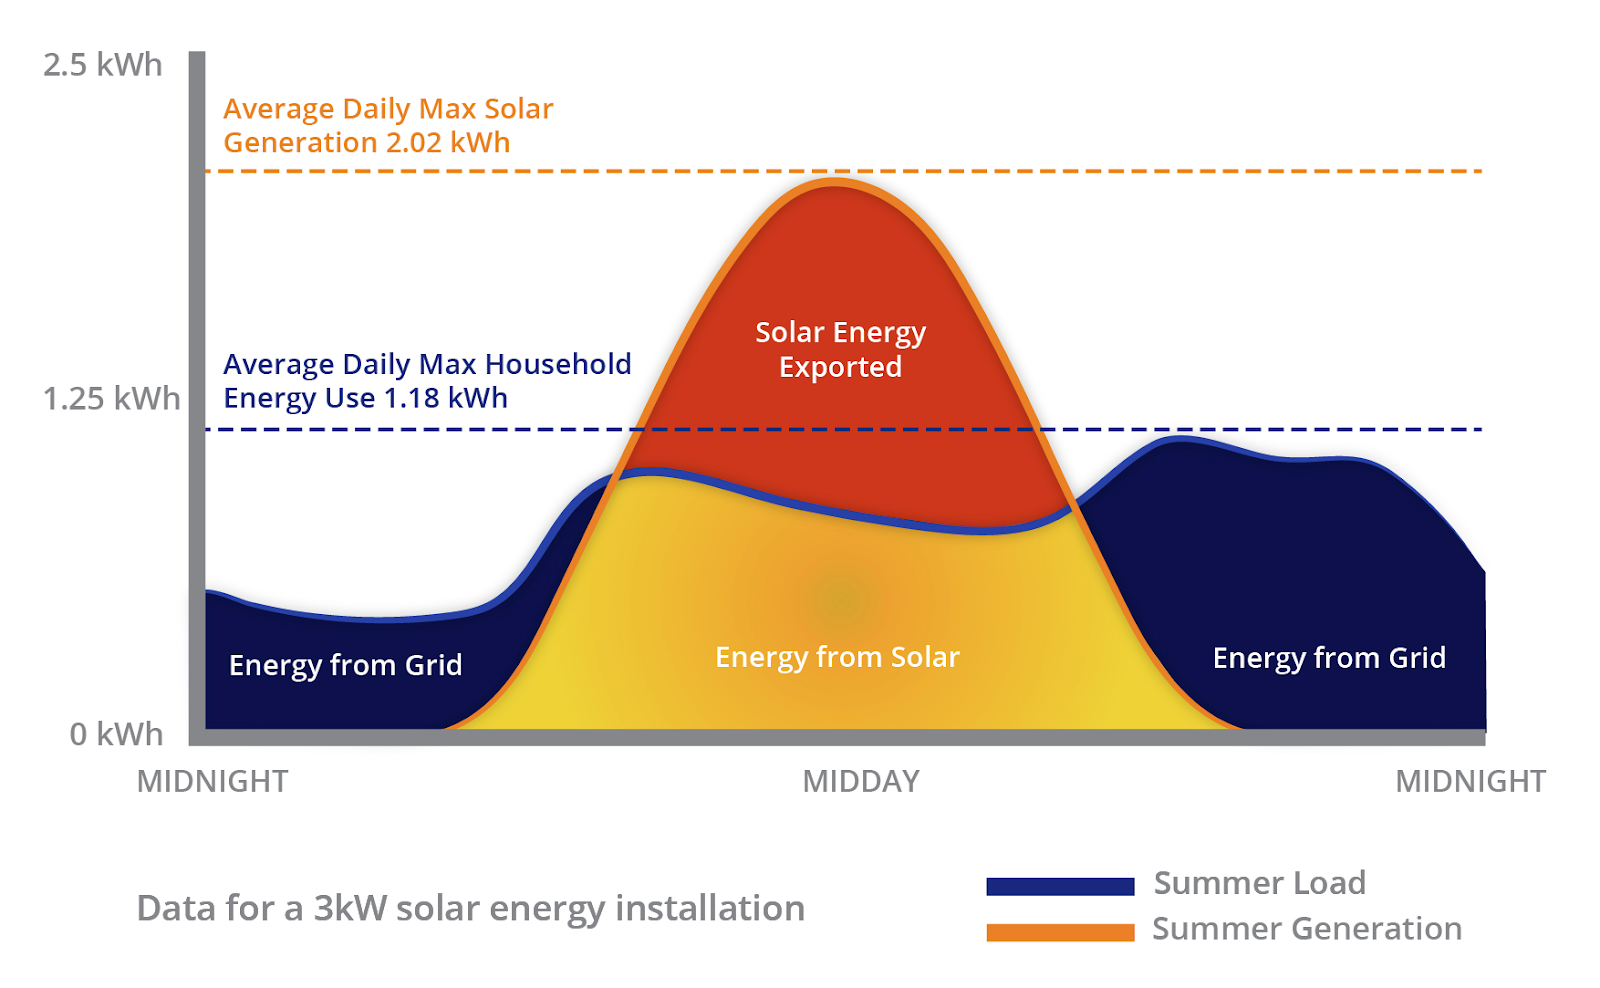 Data for a 3kW solar energy installation